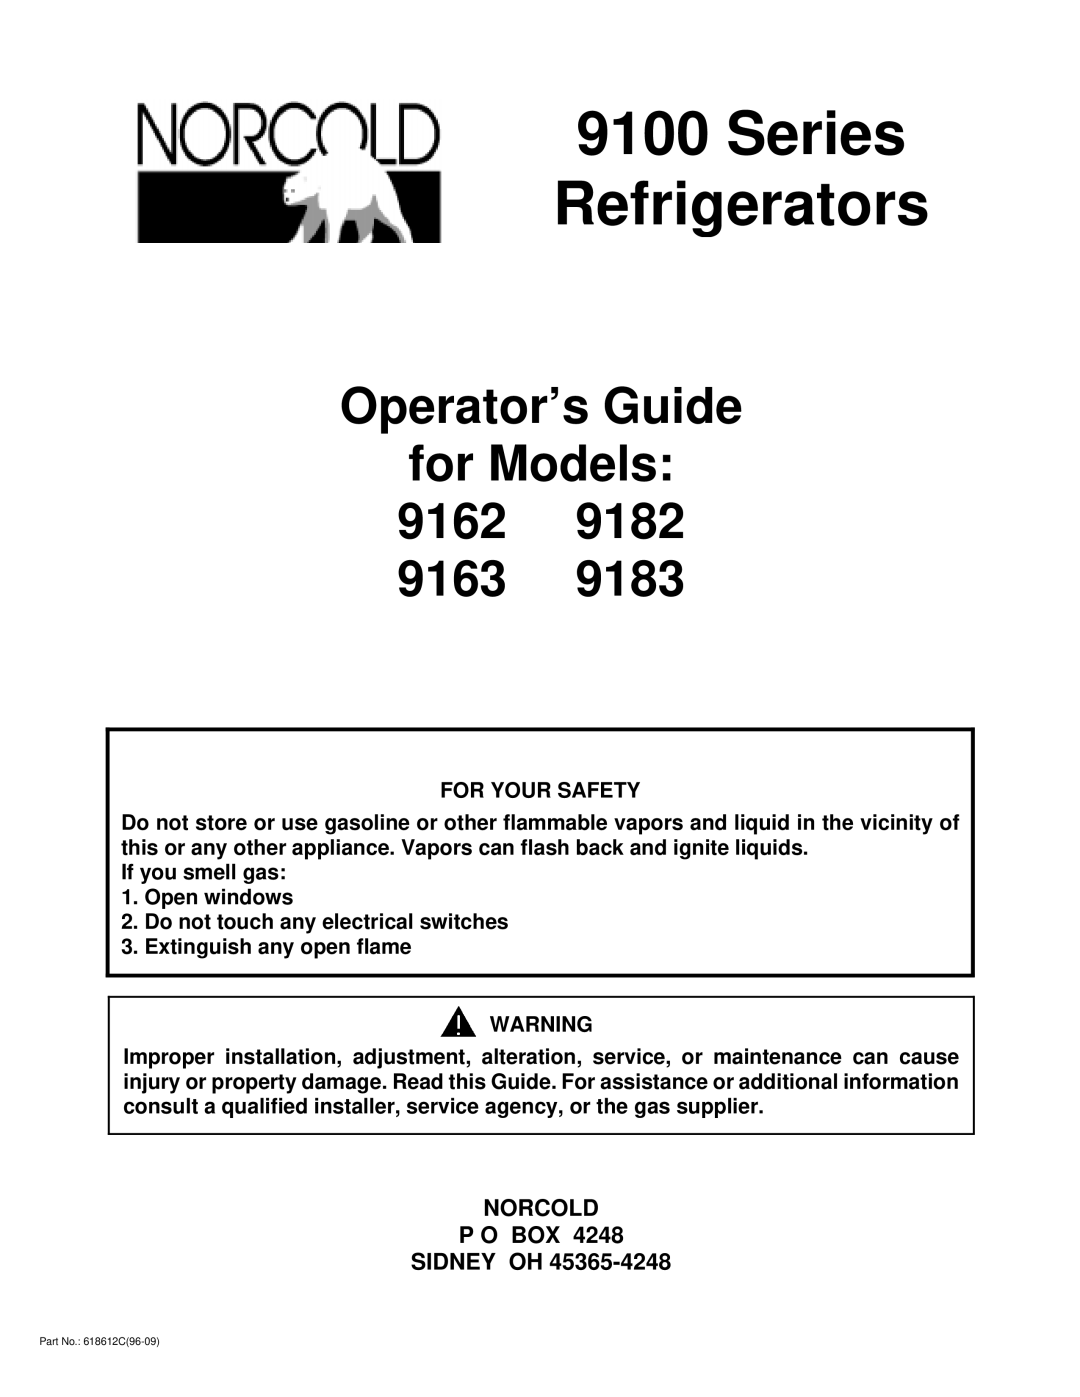 Norcold 9163, 9183 manual Norcold P O Box Sidney Oh, Series Refrigerators, Operator’s Guide for Models 9162 9182 